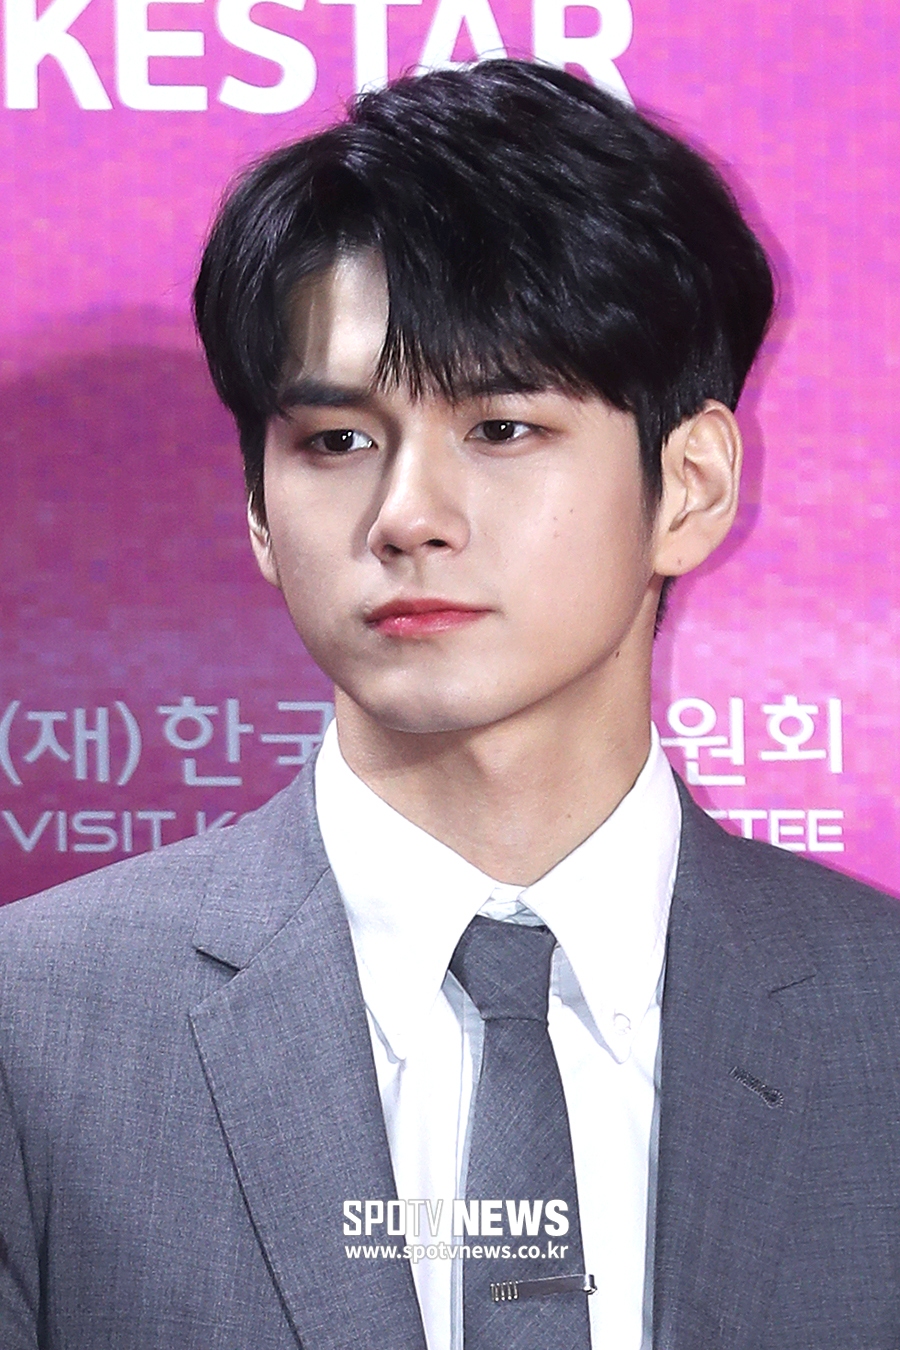 The 28th Red Carpet event for the Seoul High1 Song Festival was held at the Gocheok Sky Dome in Guro-gu, Seoul on the afternoon of the 15th. Wanna One Ong Actor poses.